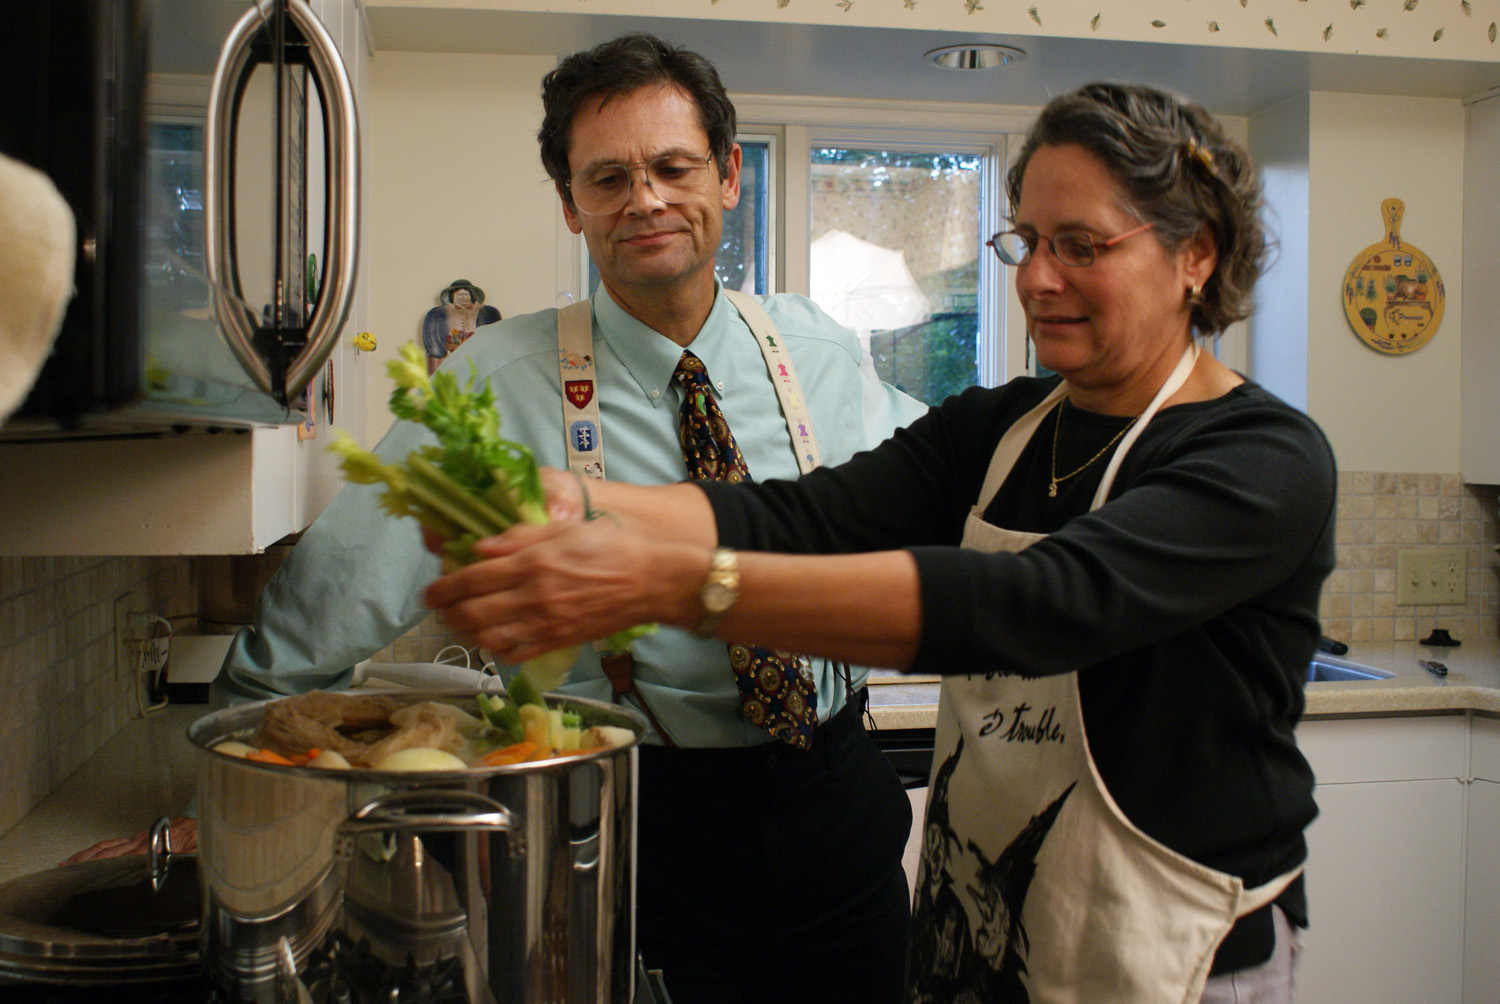 Stephen Rennard, MD, and his wife, Barbara, studied chicken soup in 2002.